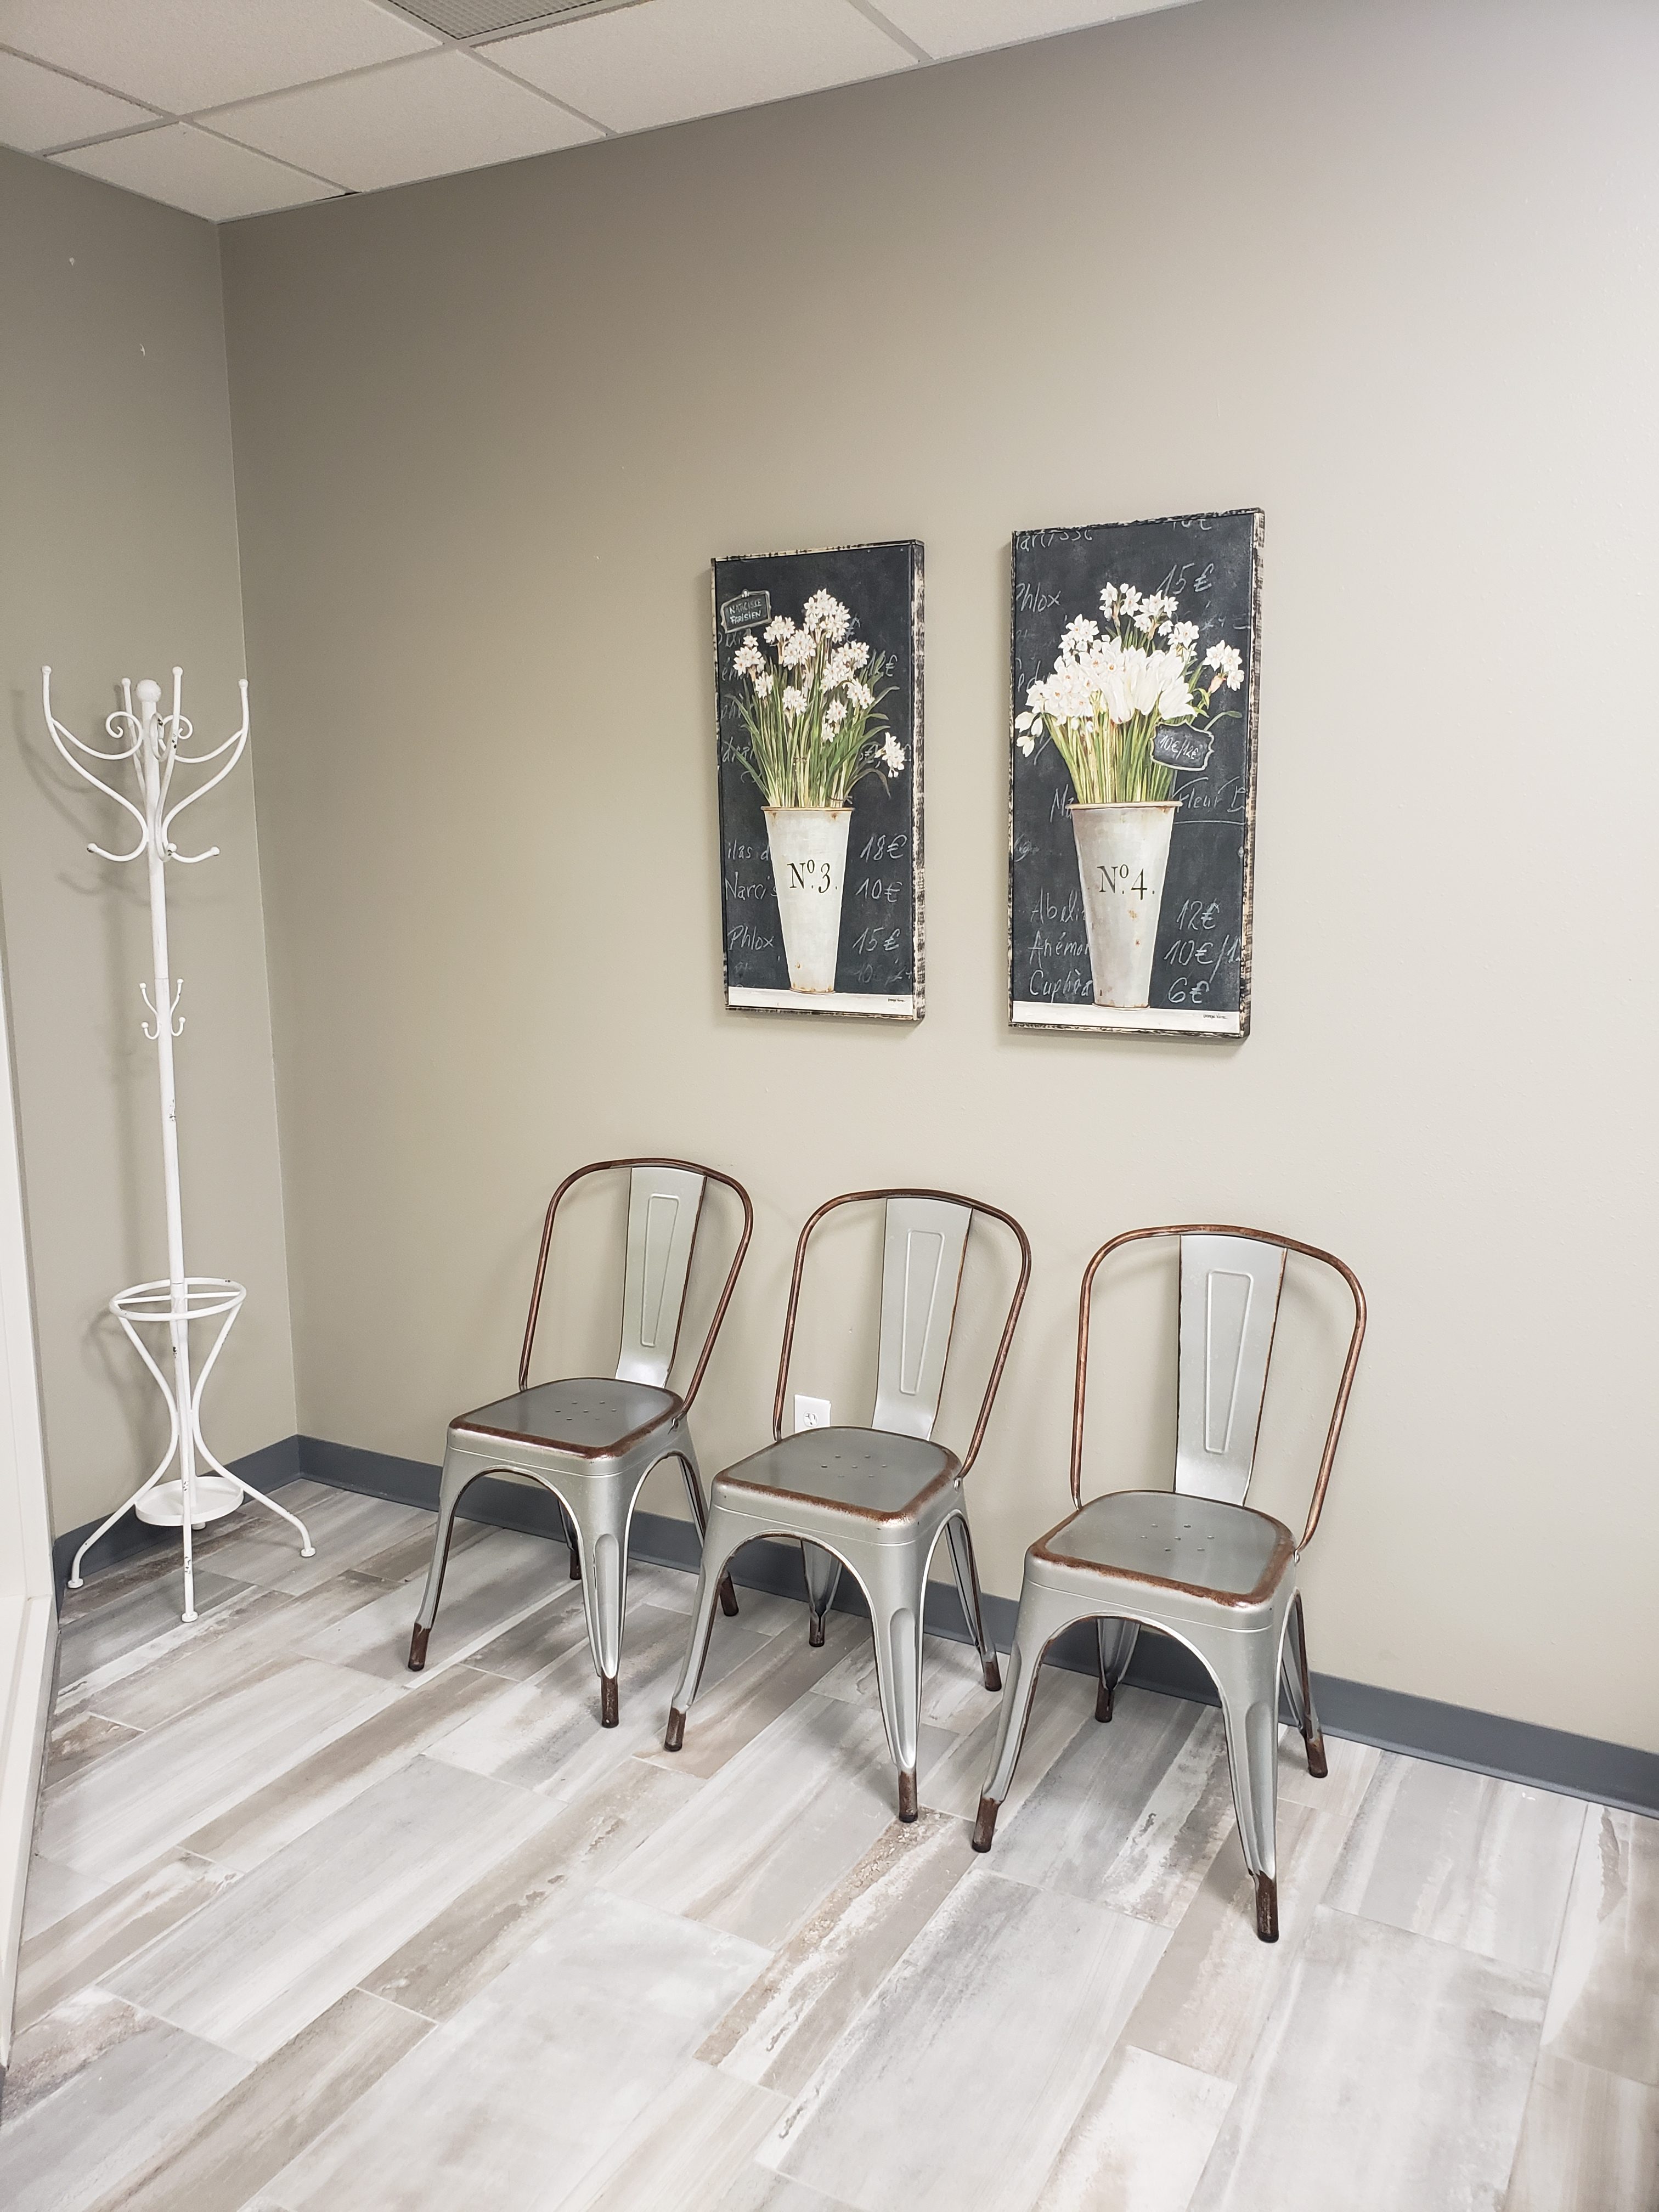 Nail Department waiting area